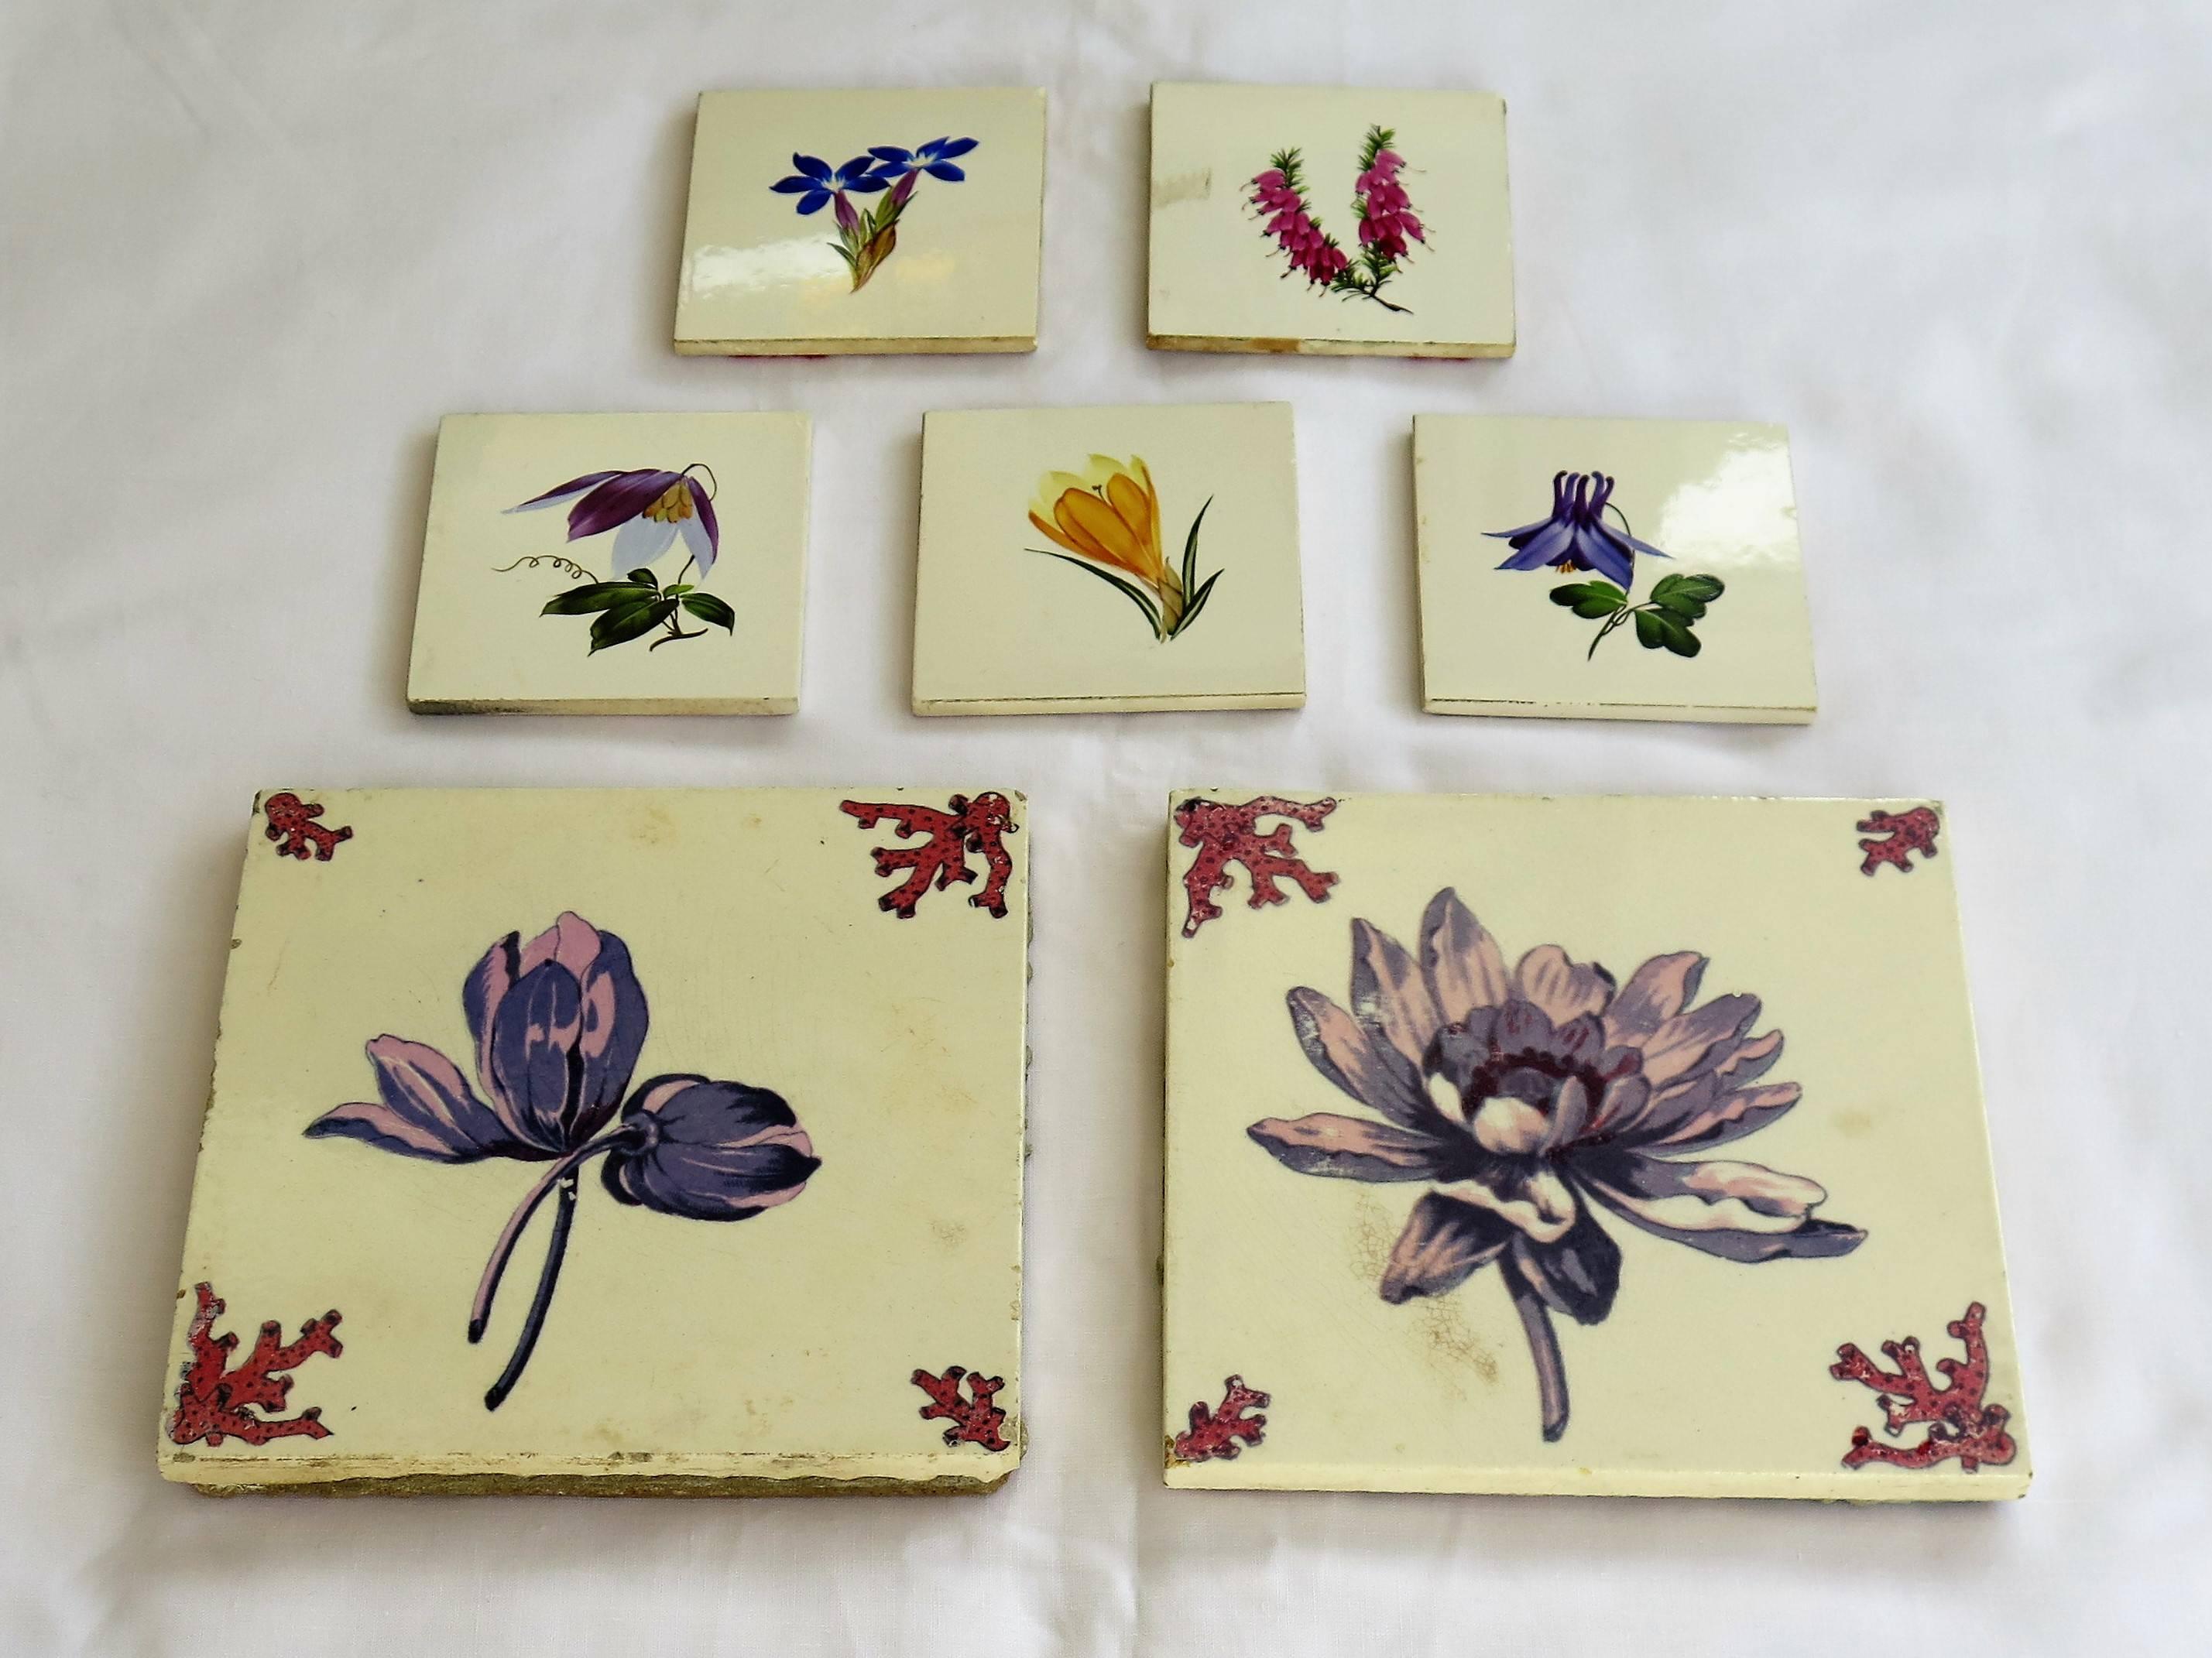 These are two sets of hand-painted ceramic wall tiles with a floral theme from the 20th century.

Set one - Two large tiles, two different flower patterns in pink and mauve shades 
 with dark pink corner motifs. Possibly from the Netherlands, circa